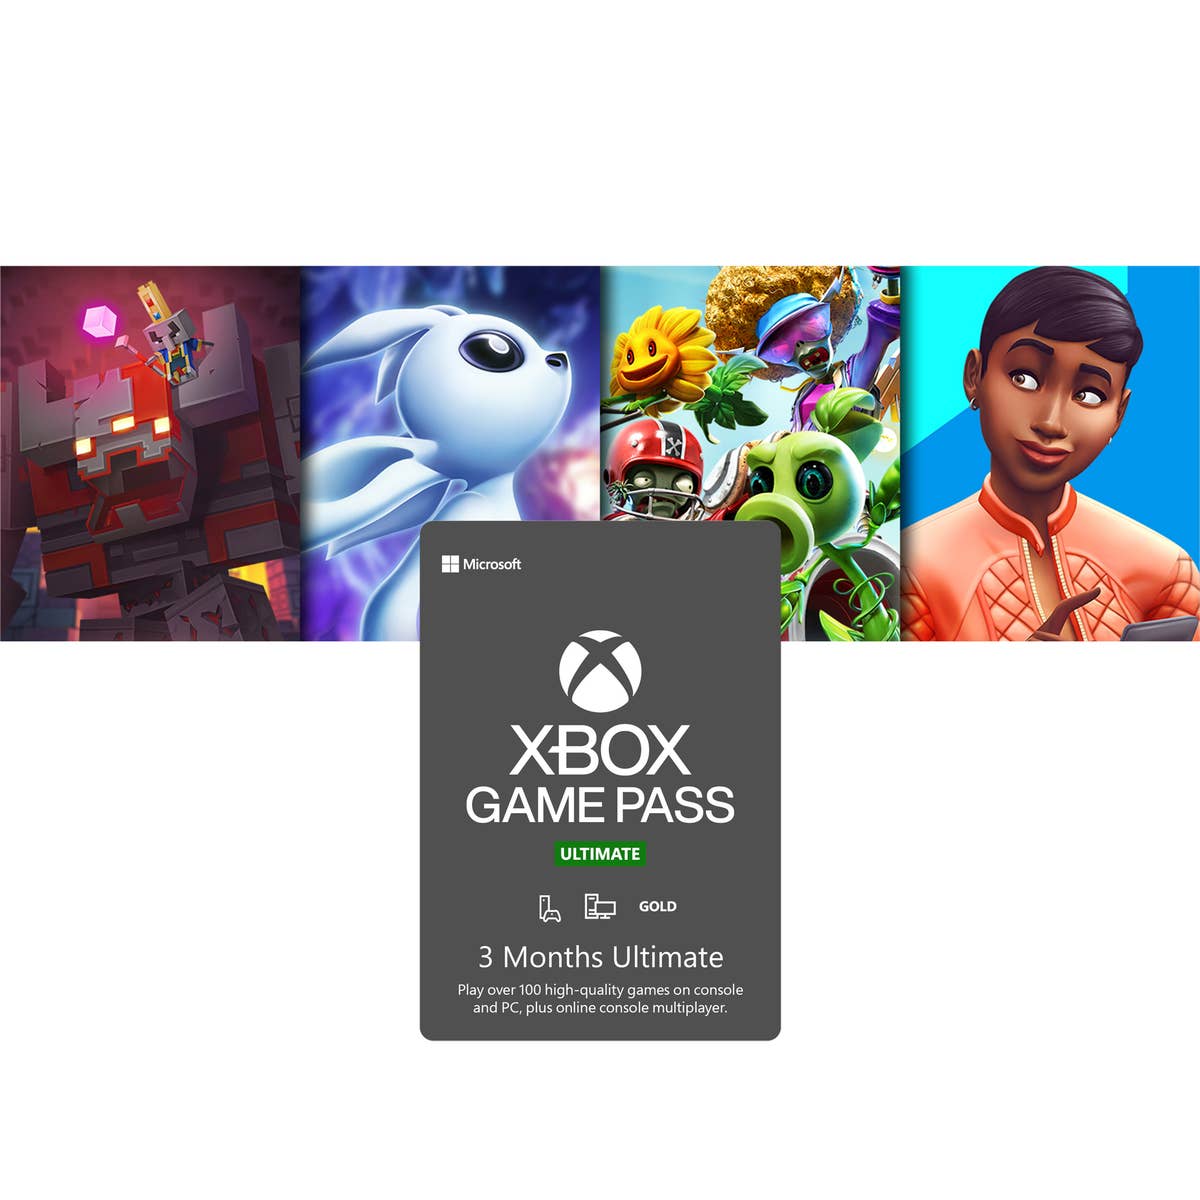 Xbox Game Pass Ultimate - 3 Meses